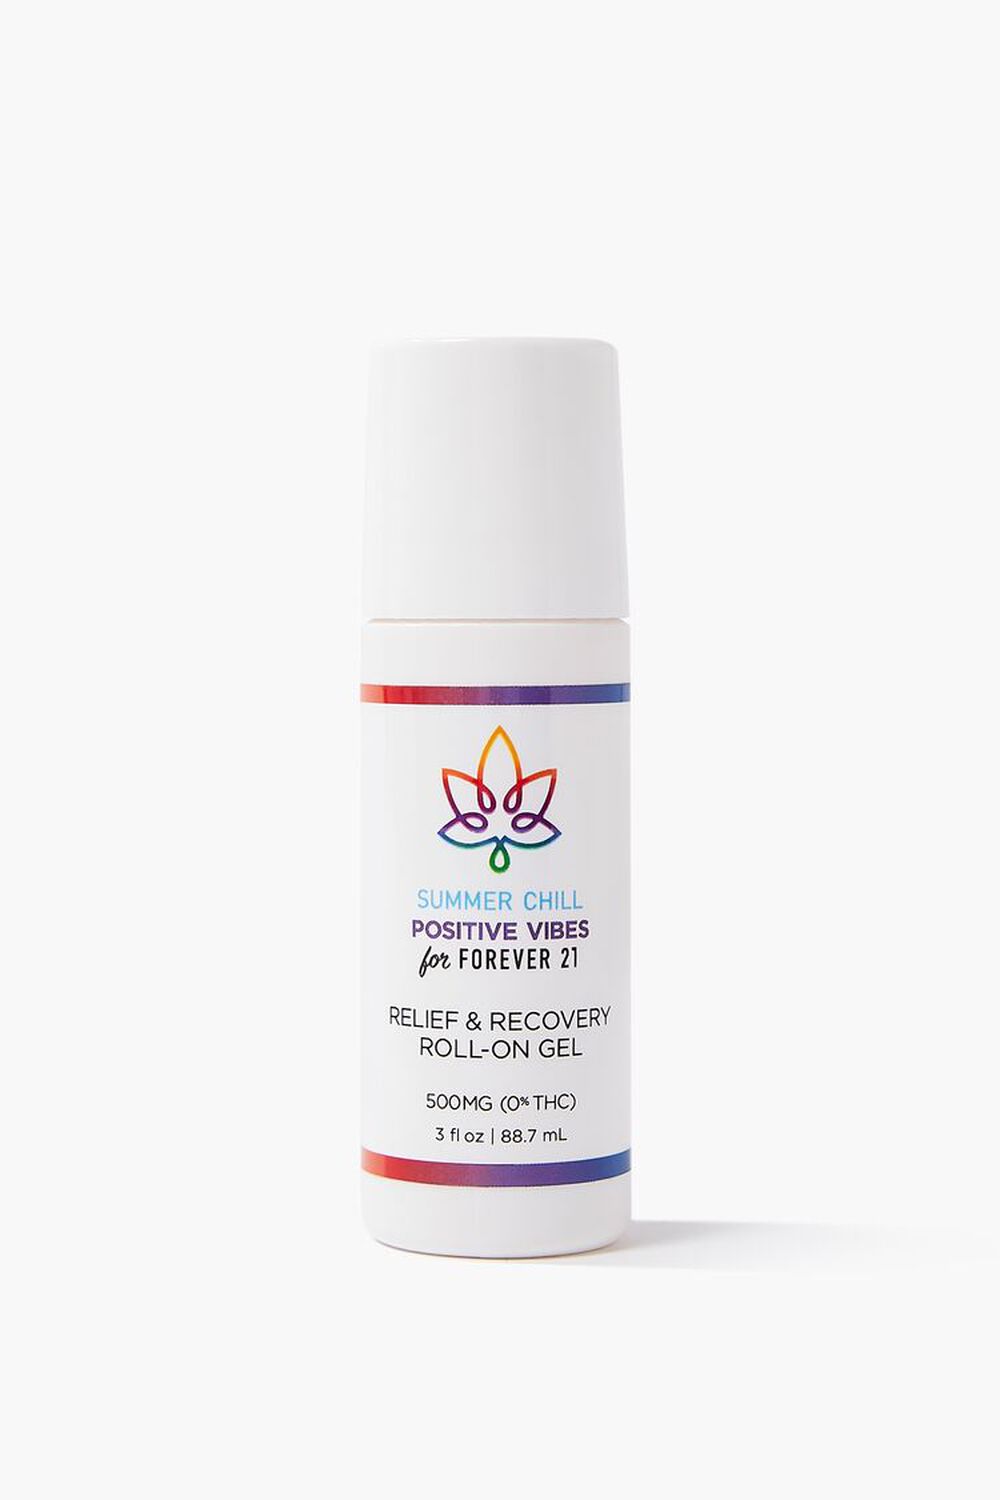 WHITE/MULTI Summer Chill Positive Vibes for Forever 21 CBD Relief & Recovery Roll-On Gel, image 1